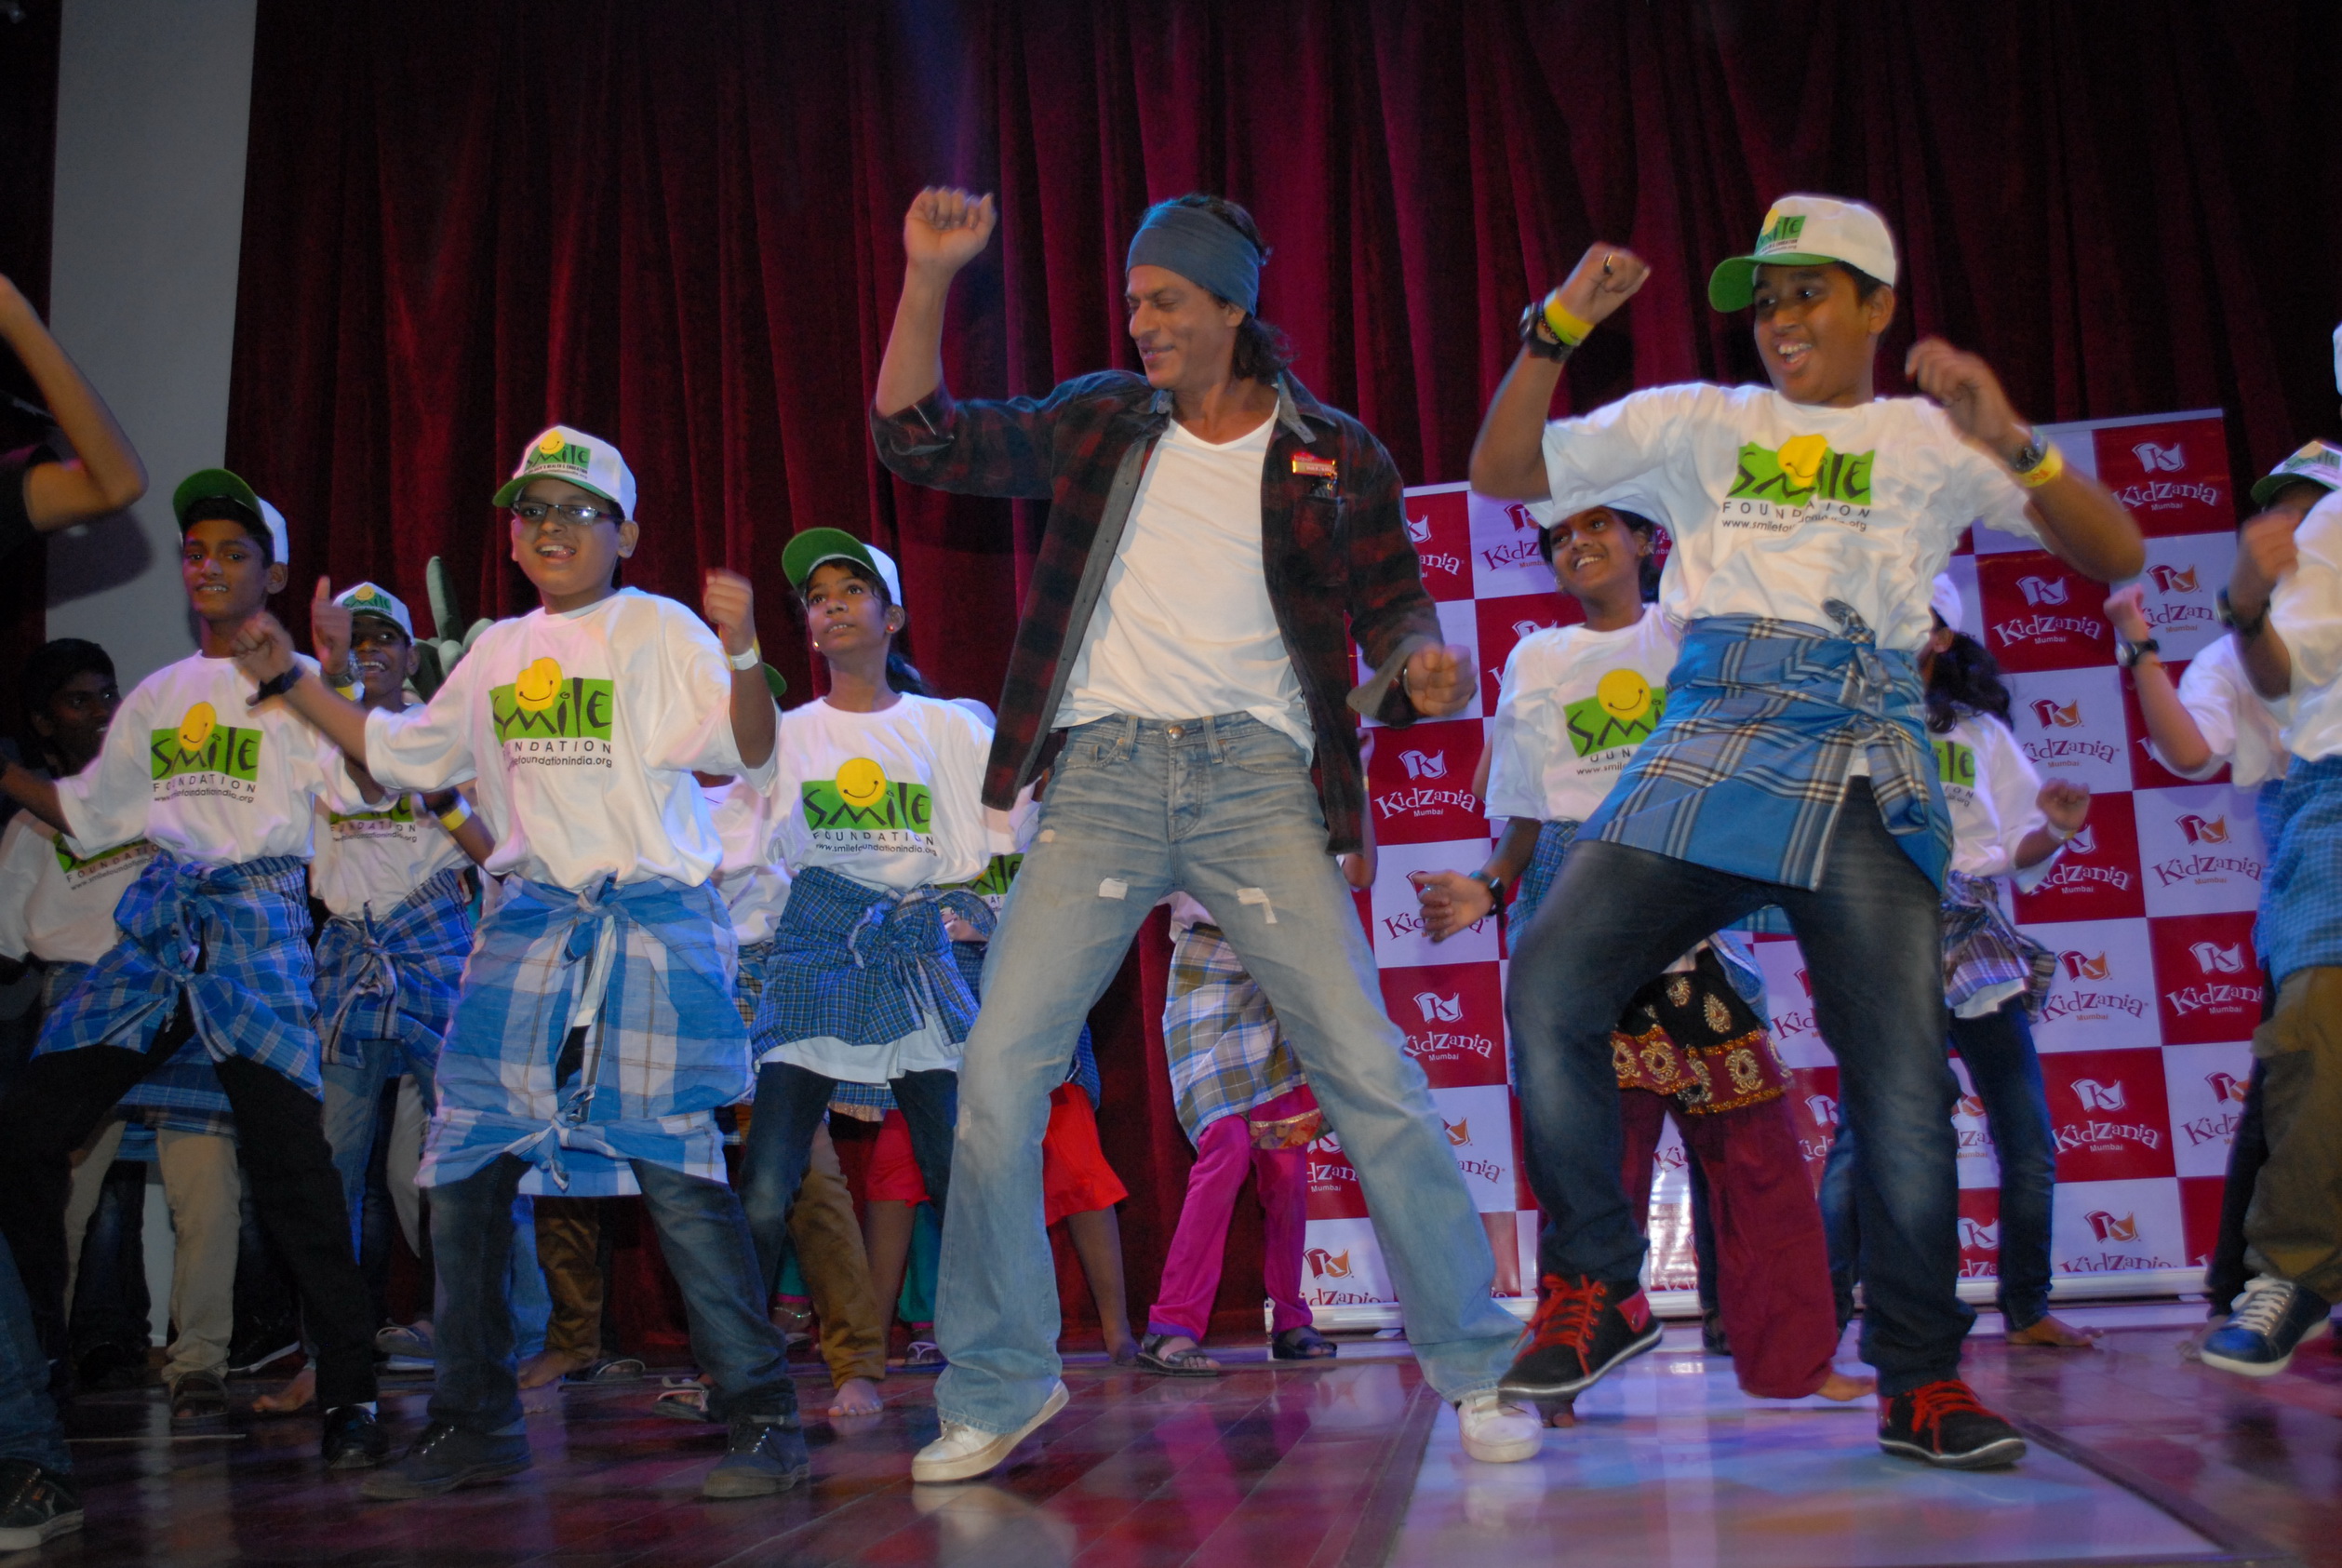 Shahrukh Khan Celebrates Father's Day With Smile Foundation Children